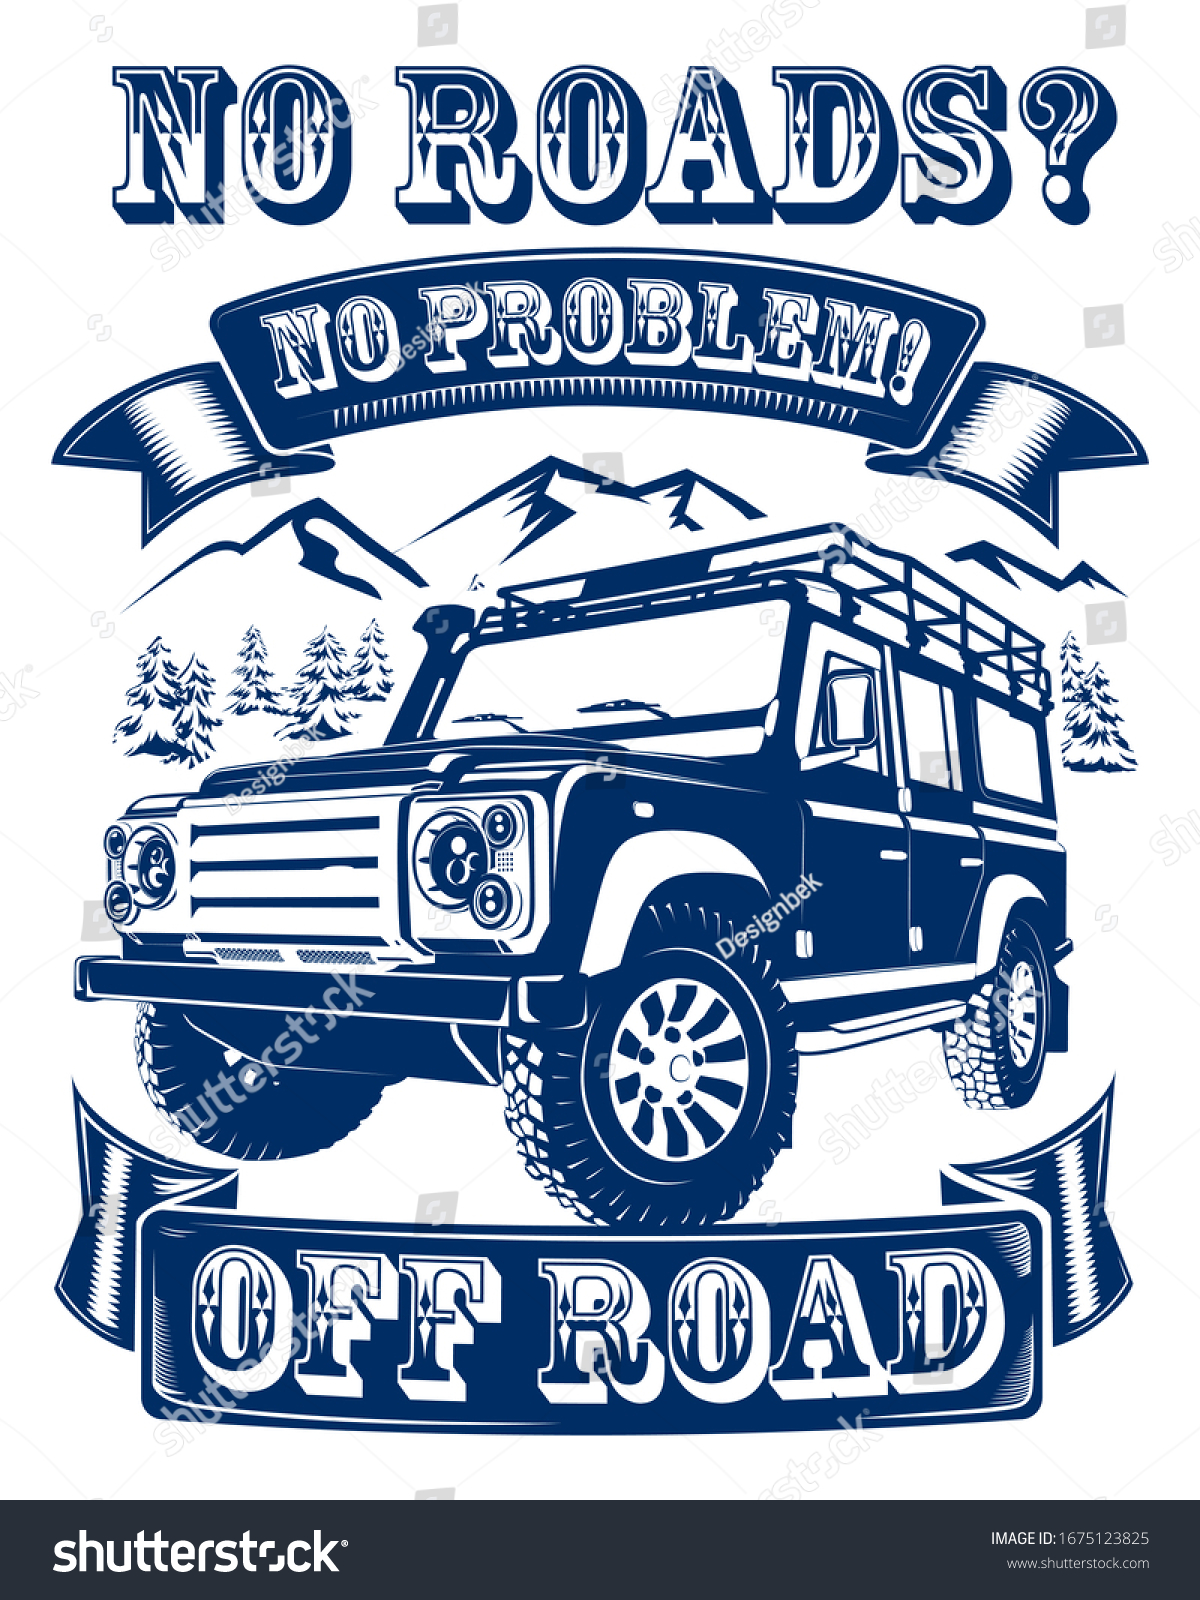 No roads, No problem off road car concept for expedition with nature vector illustration #1675123825